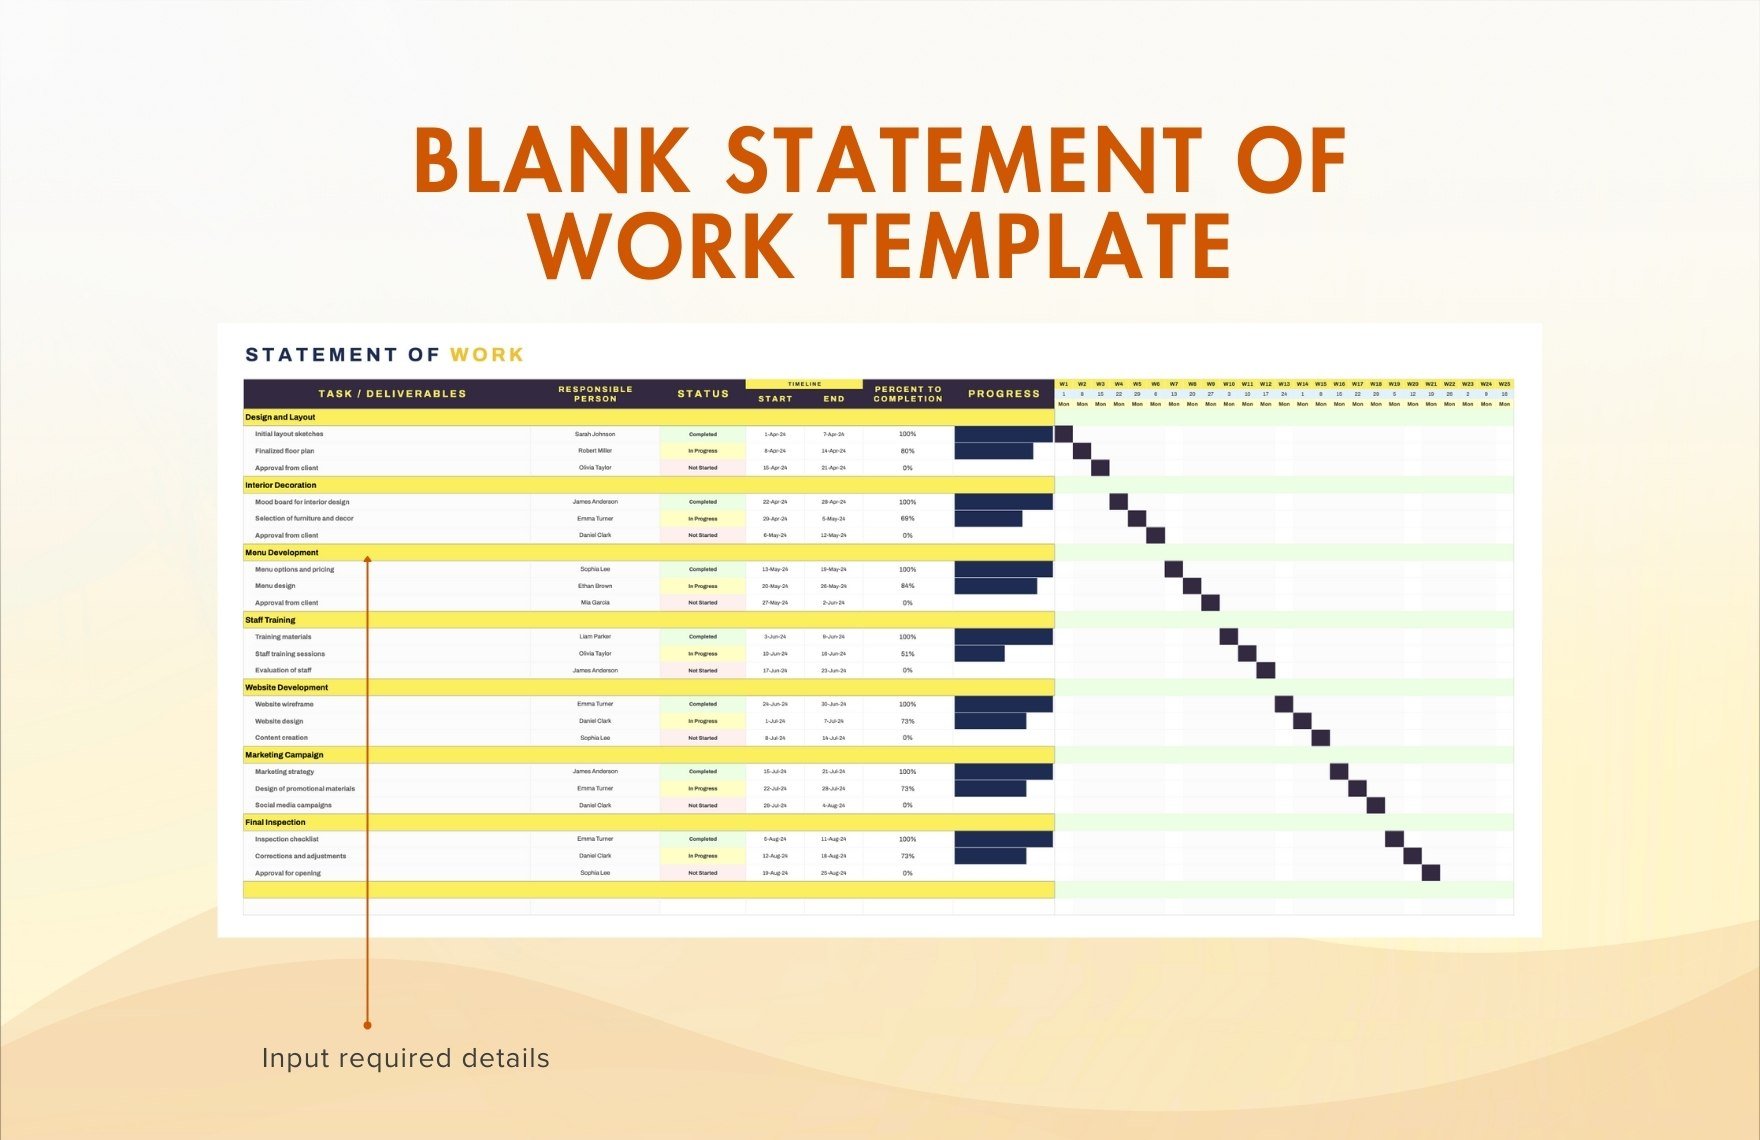 Blank Statement of Work Template